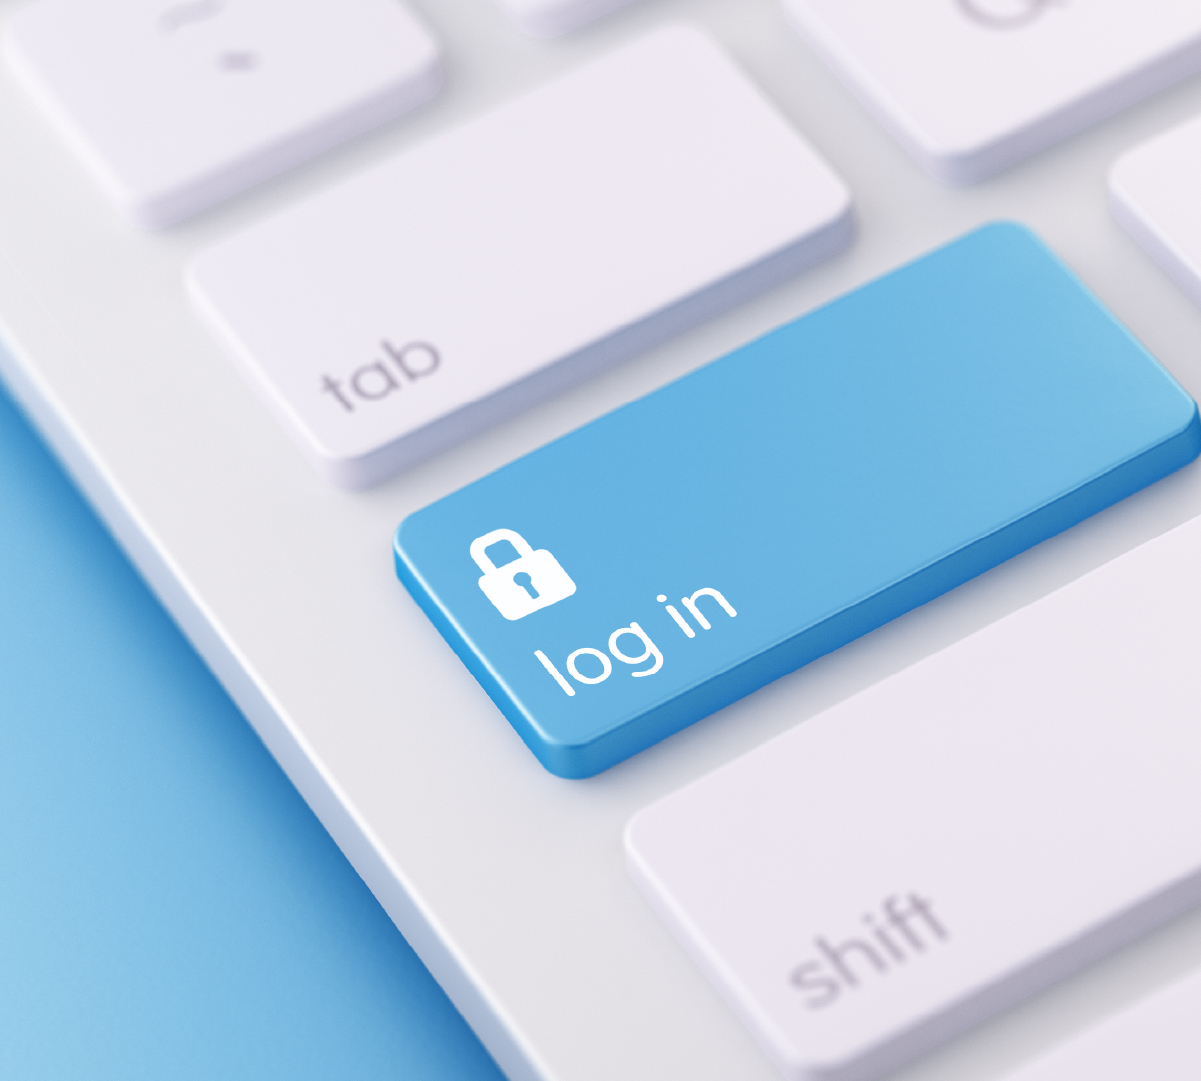 Close up of ‘Log in’ button with lock icon, on computer keyboard.